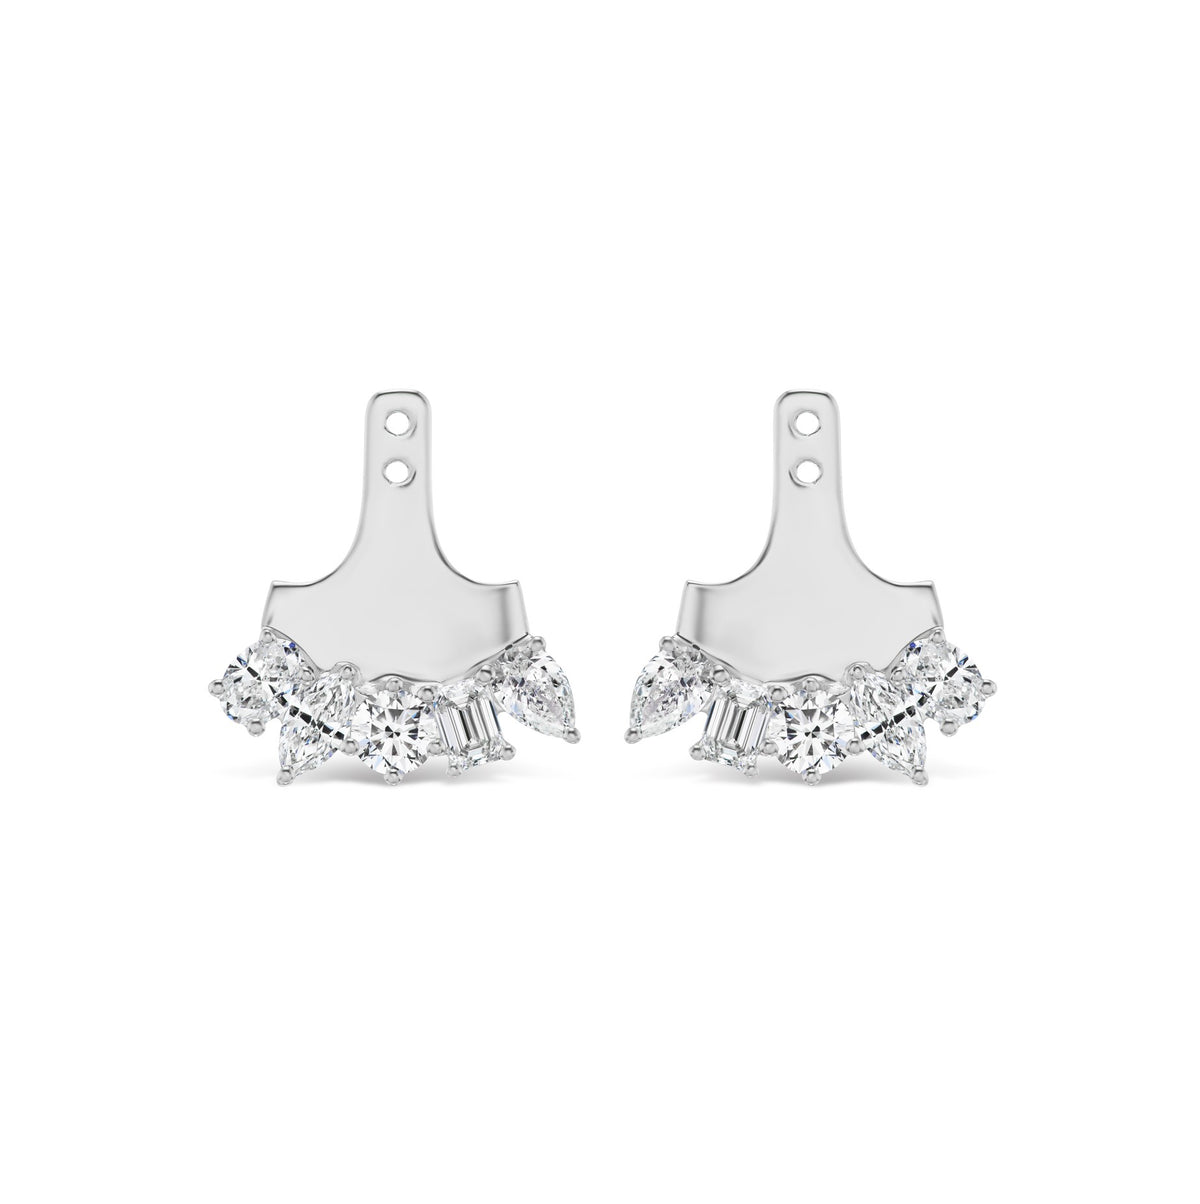 Ear Jackets in White Gold with Mixed Shape Diamonds